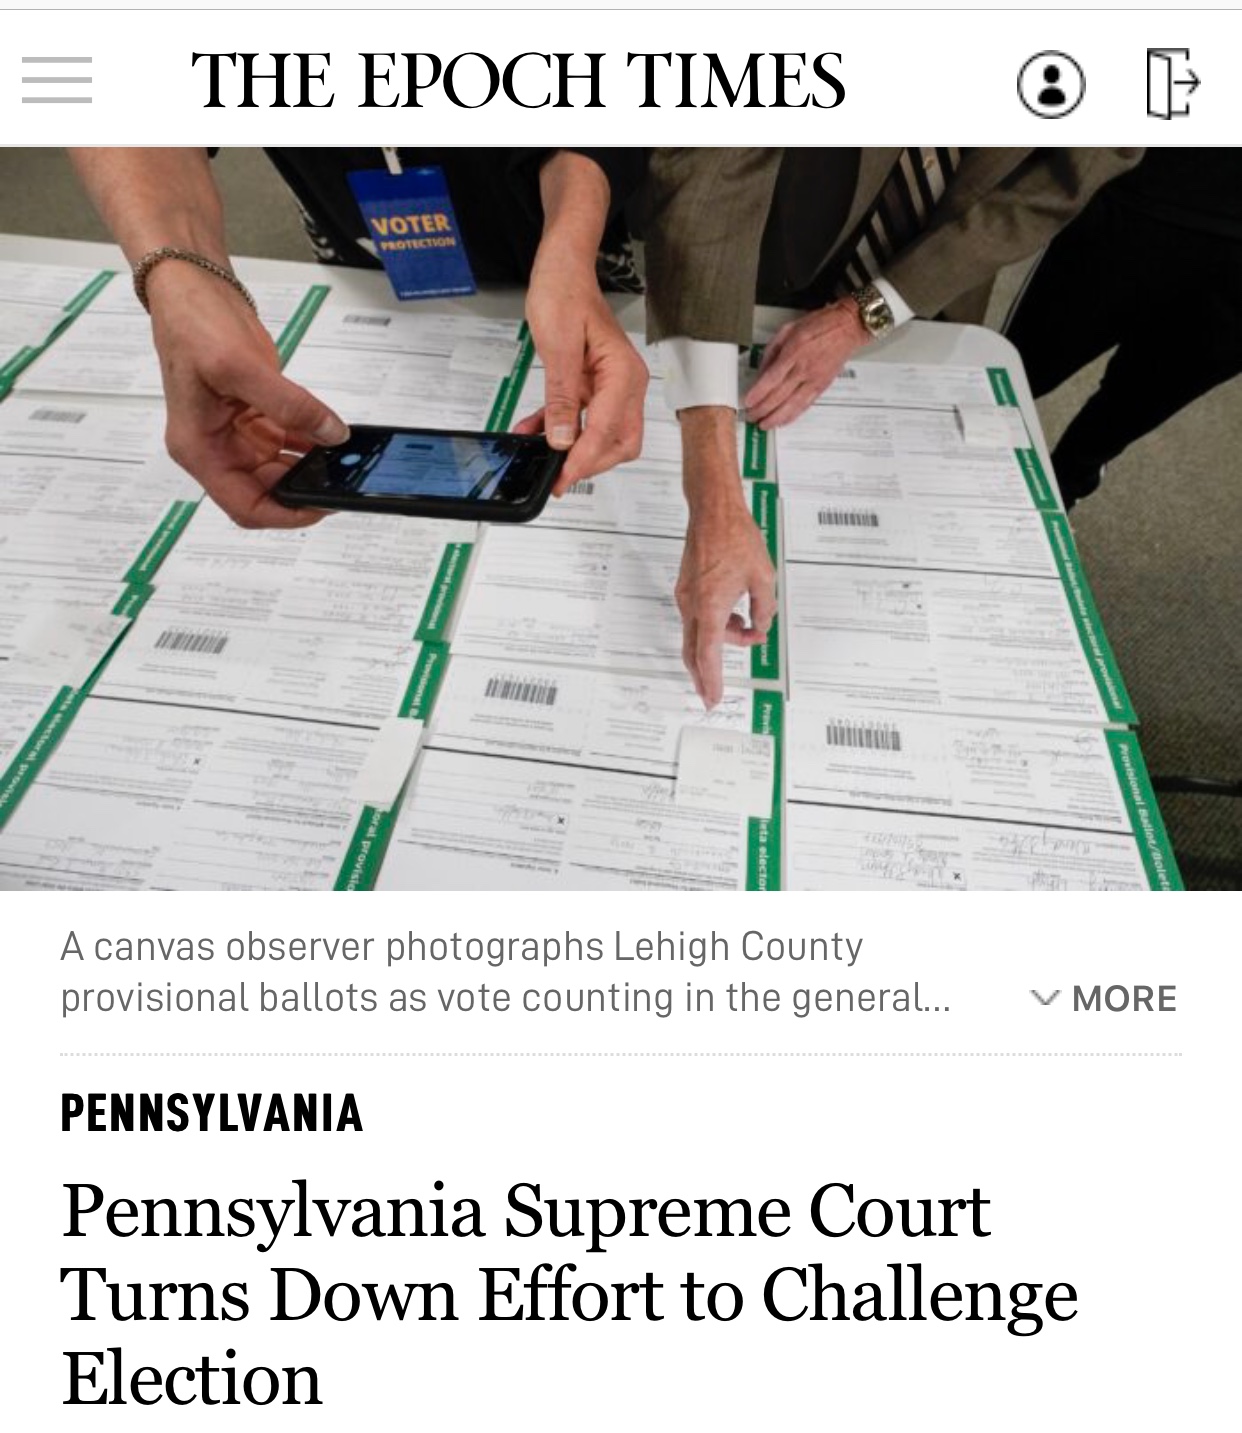 Pennsylvania Supreme Court Turns Down Effort to Challenge Election Violating Fourteenth and First Amendments to the U.S. Constitution